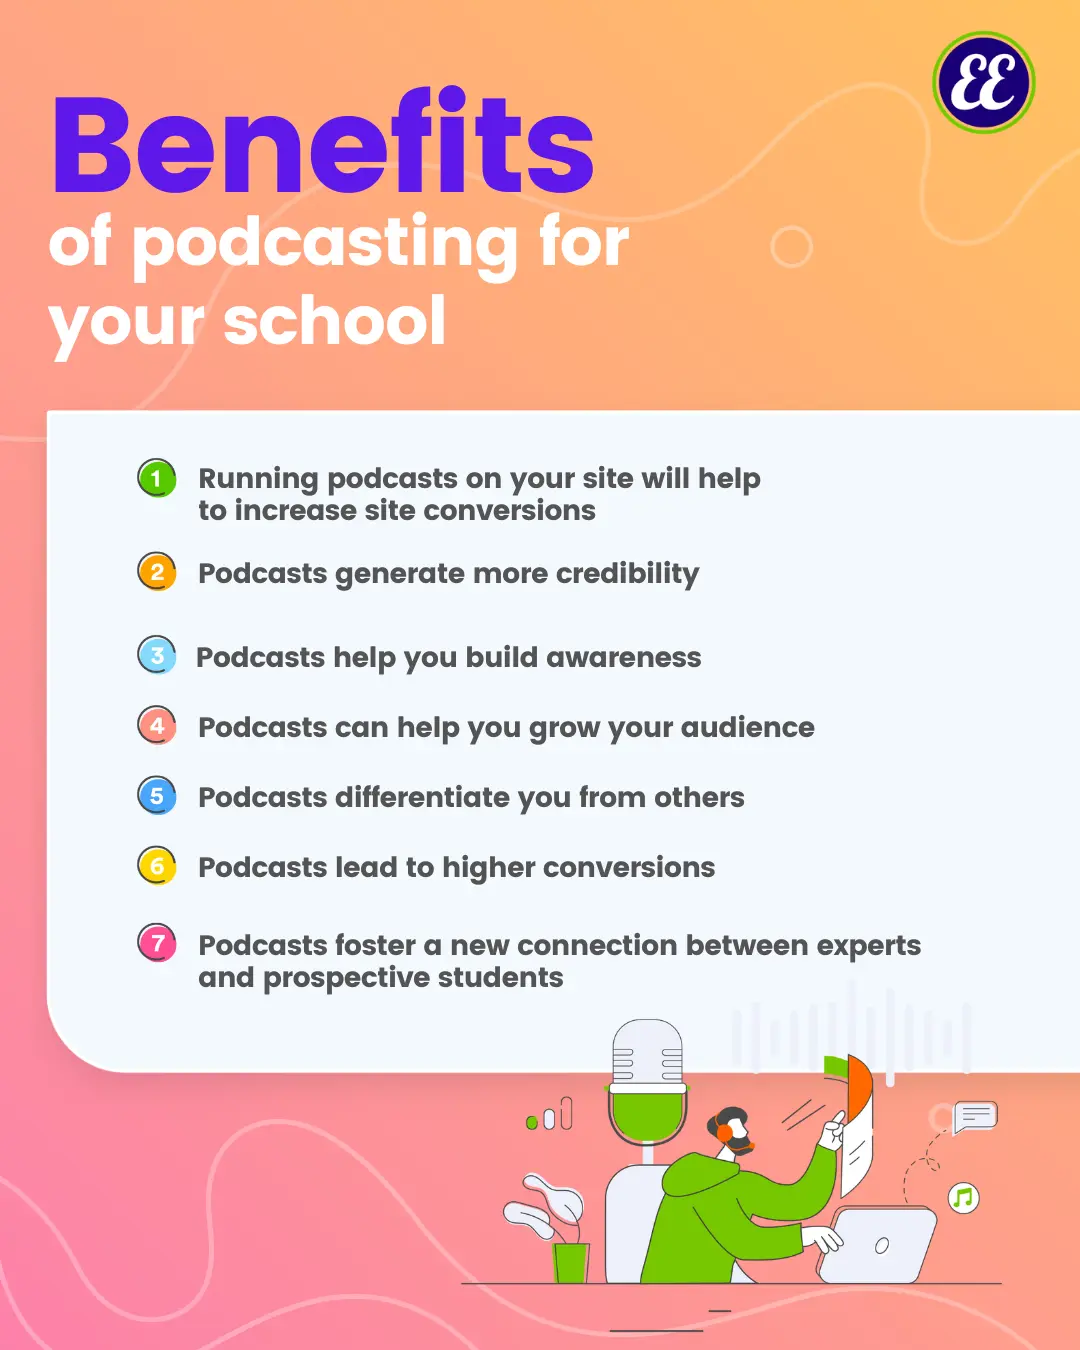 Benefits of podcasting for your school